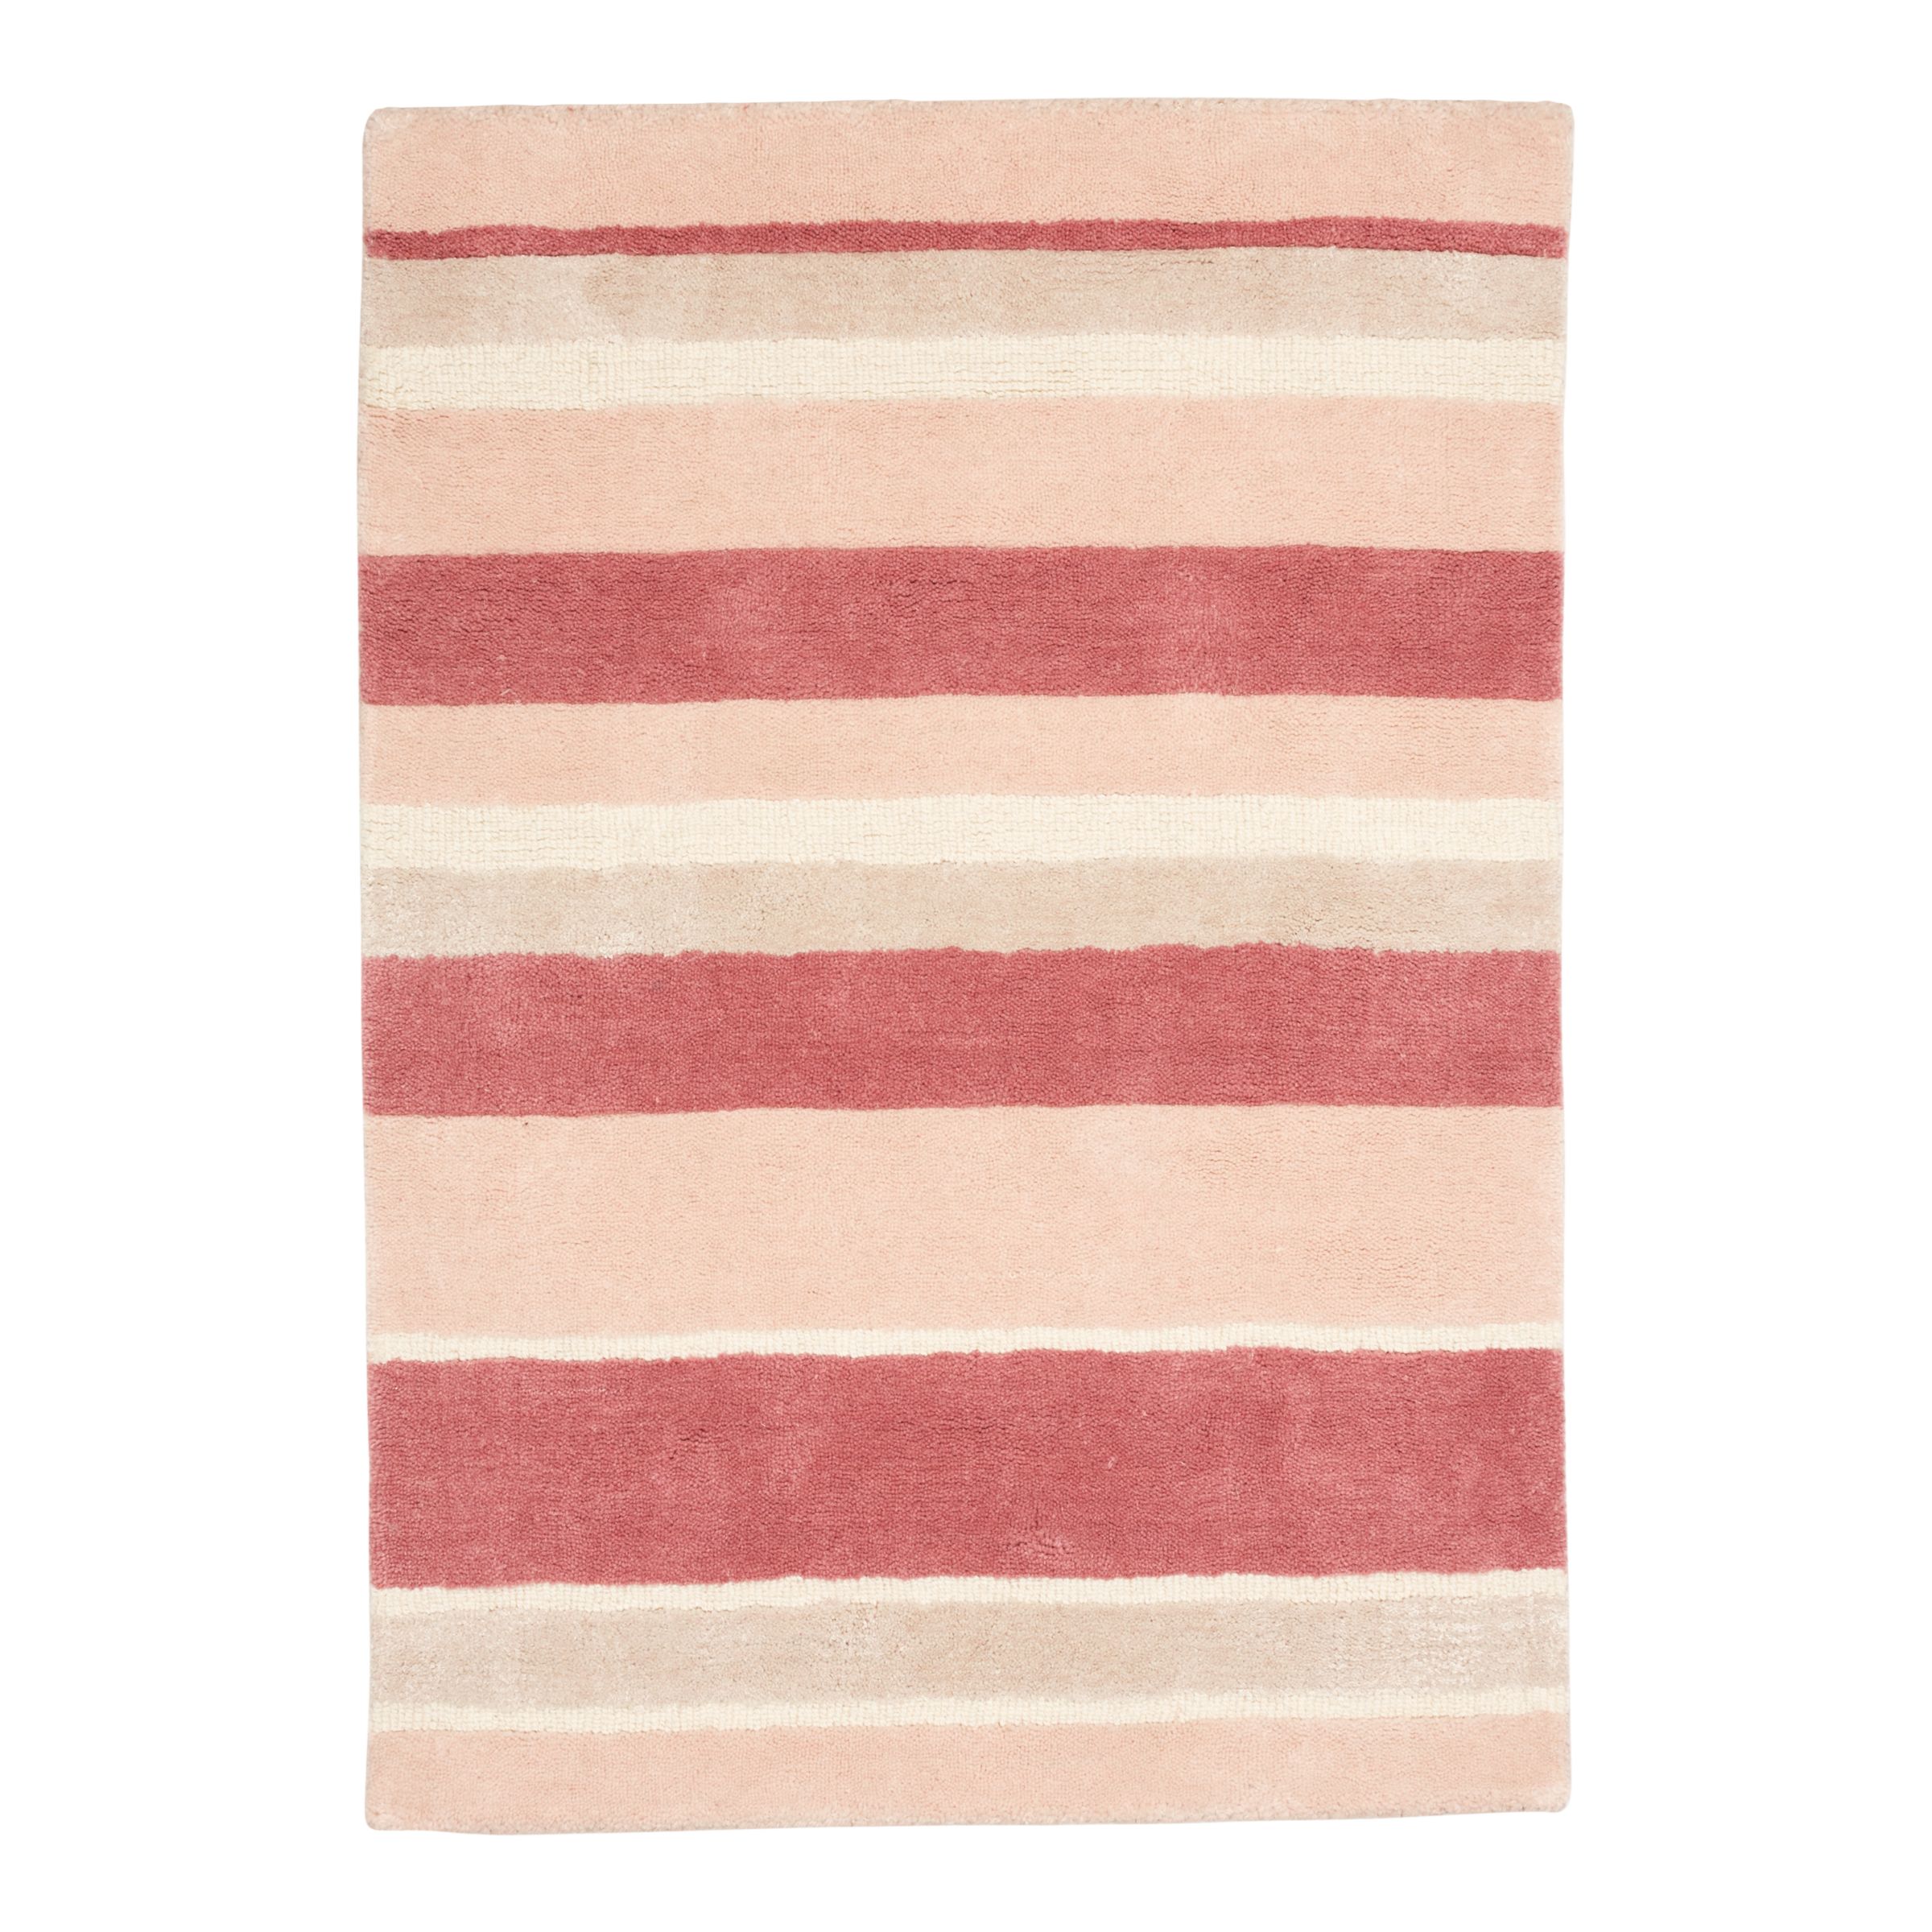 little home at John Lewis Ameila Striped Children's Rug, Pink, L100 x W70cm